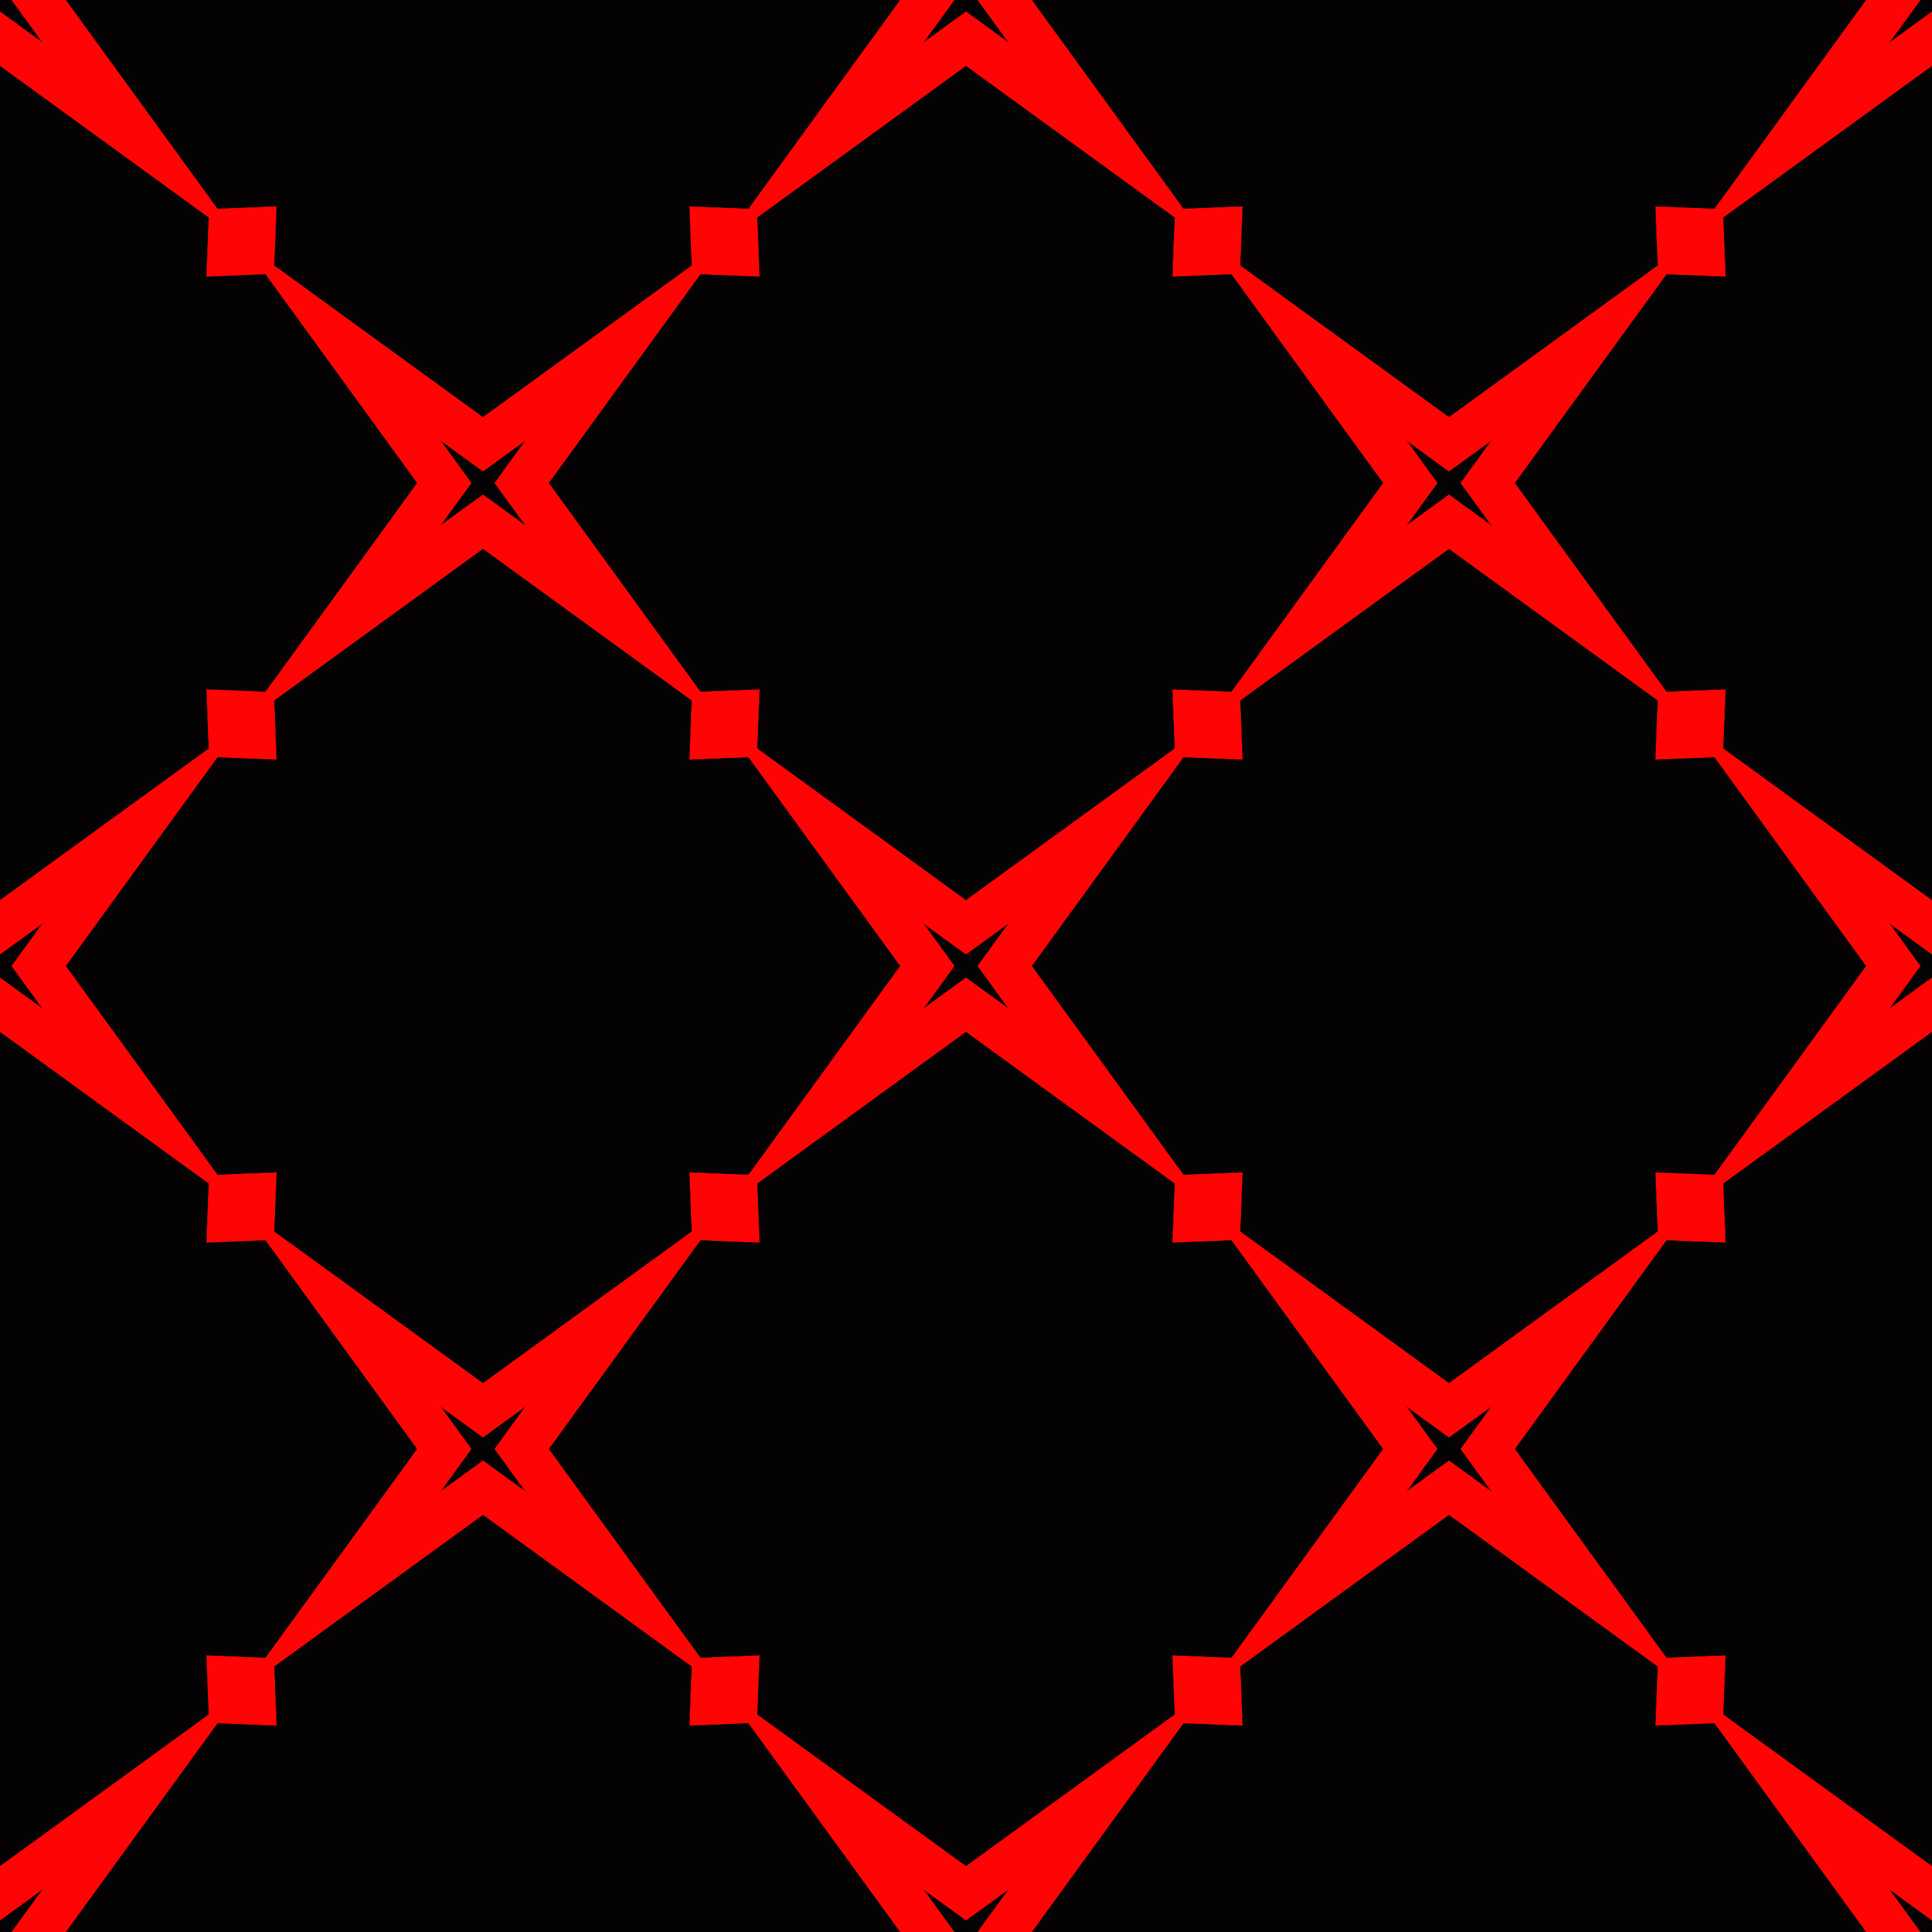 grid, red, abstract, pattern, texture, textures, symmetry lock screen backgrounds